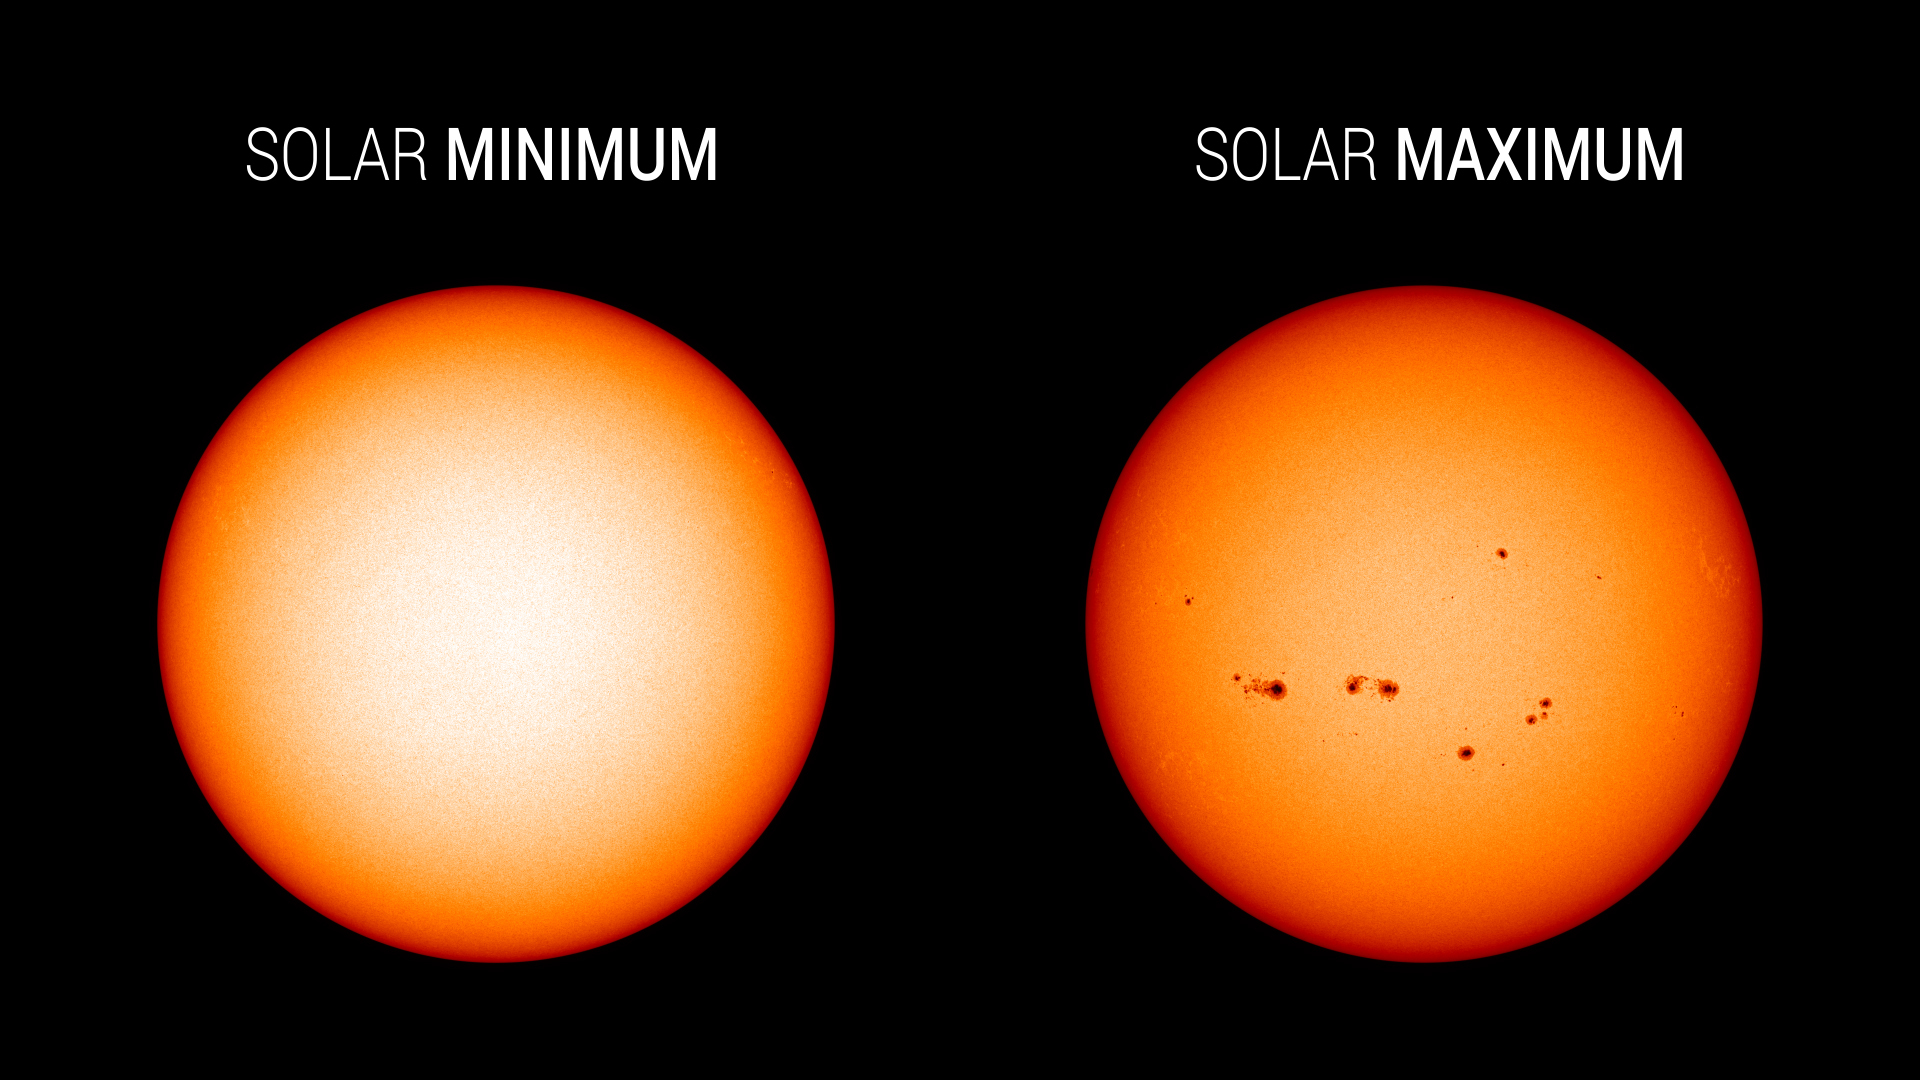 Two visible-light images of the Sun appear side by side. Left: A spotless Sun at solar minimum. Right: A Sun with many sunspots at solar maximum.